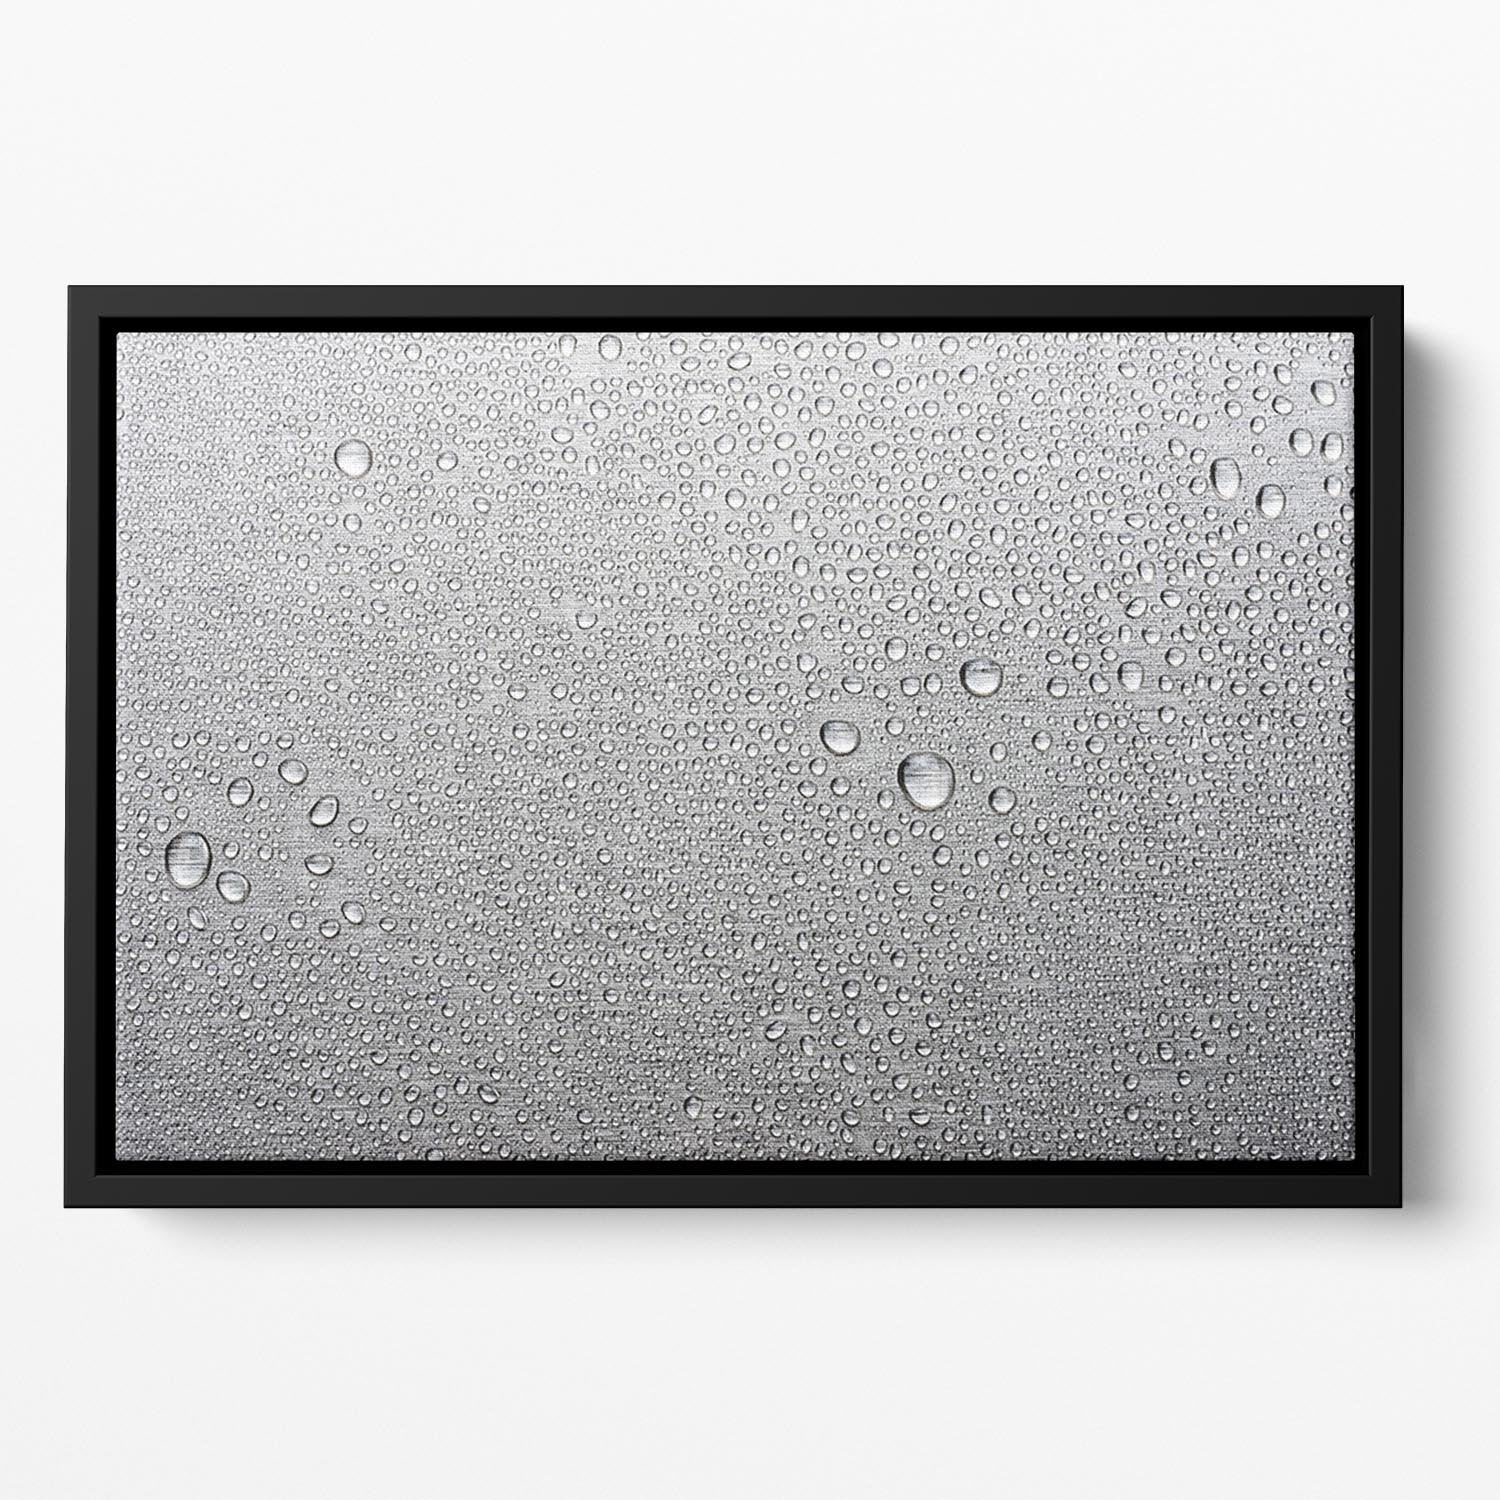 Brushed metal surface with water Floating Framed Canvas - Canvas Art Rocks - 2